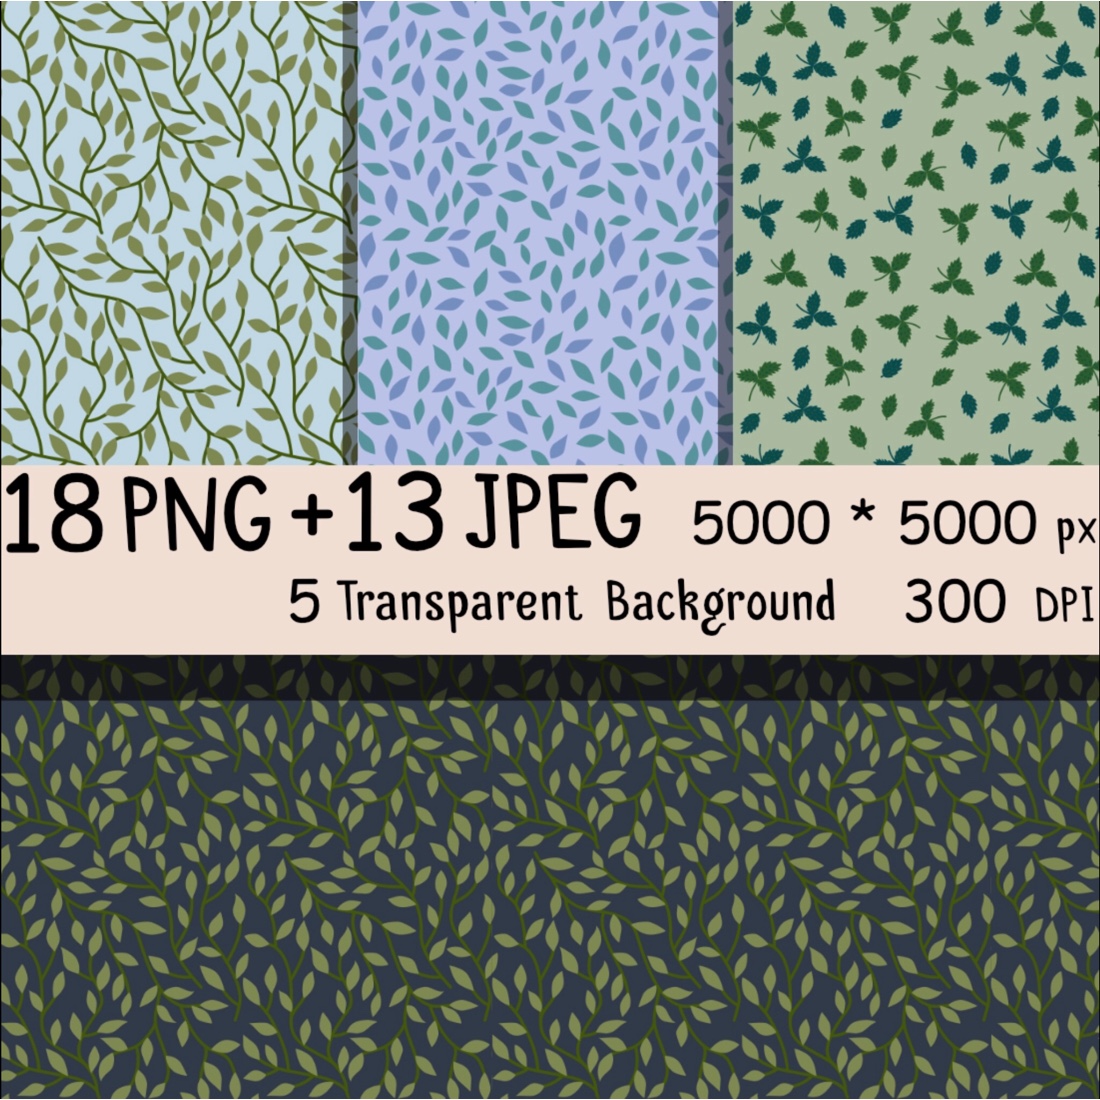 Hand Drawn Seamless Leaves Repeat Patterns Description